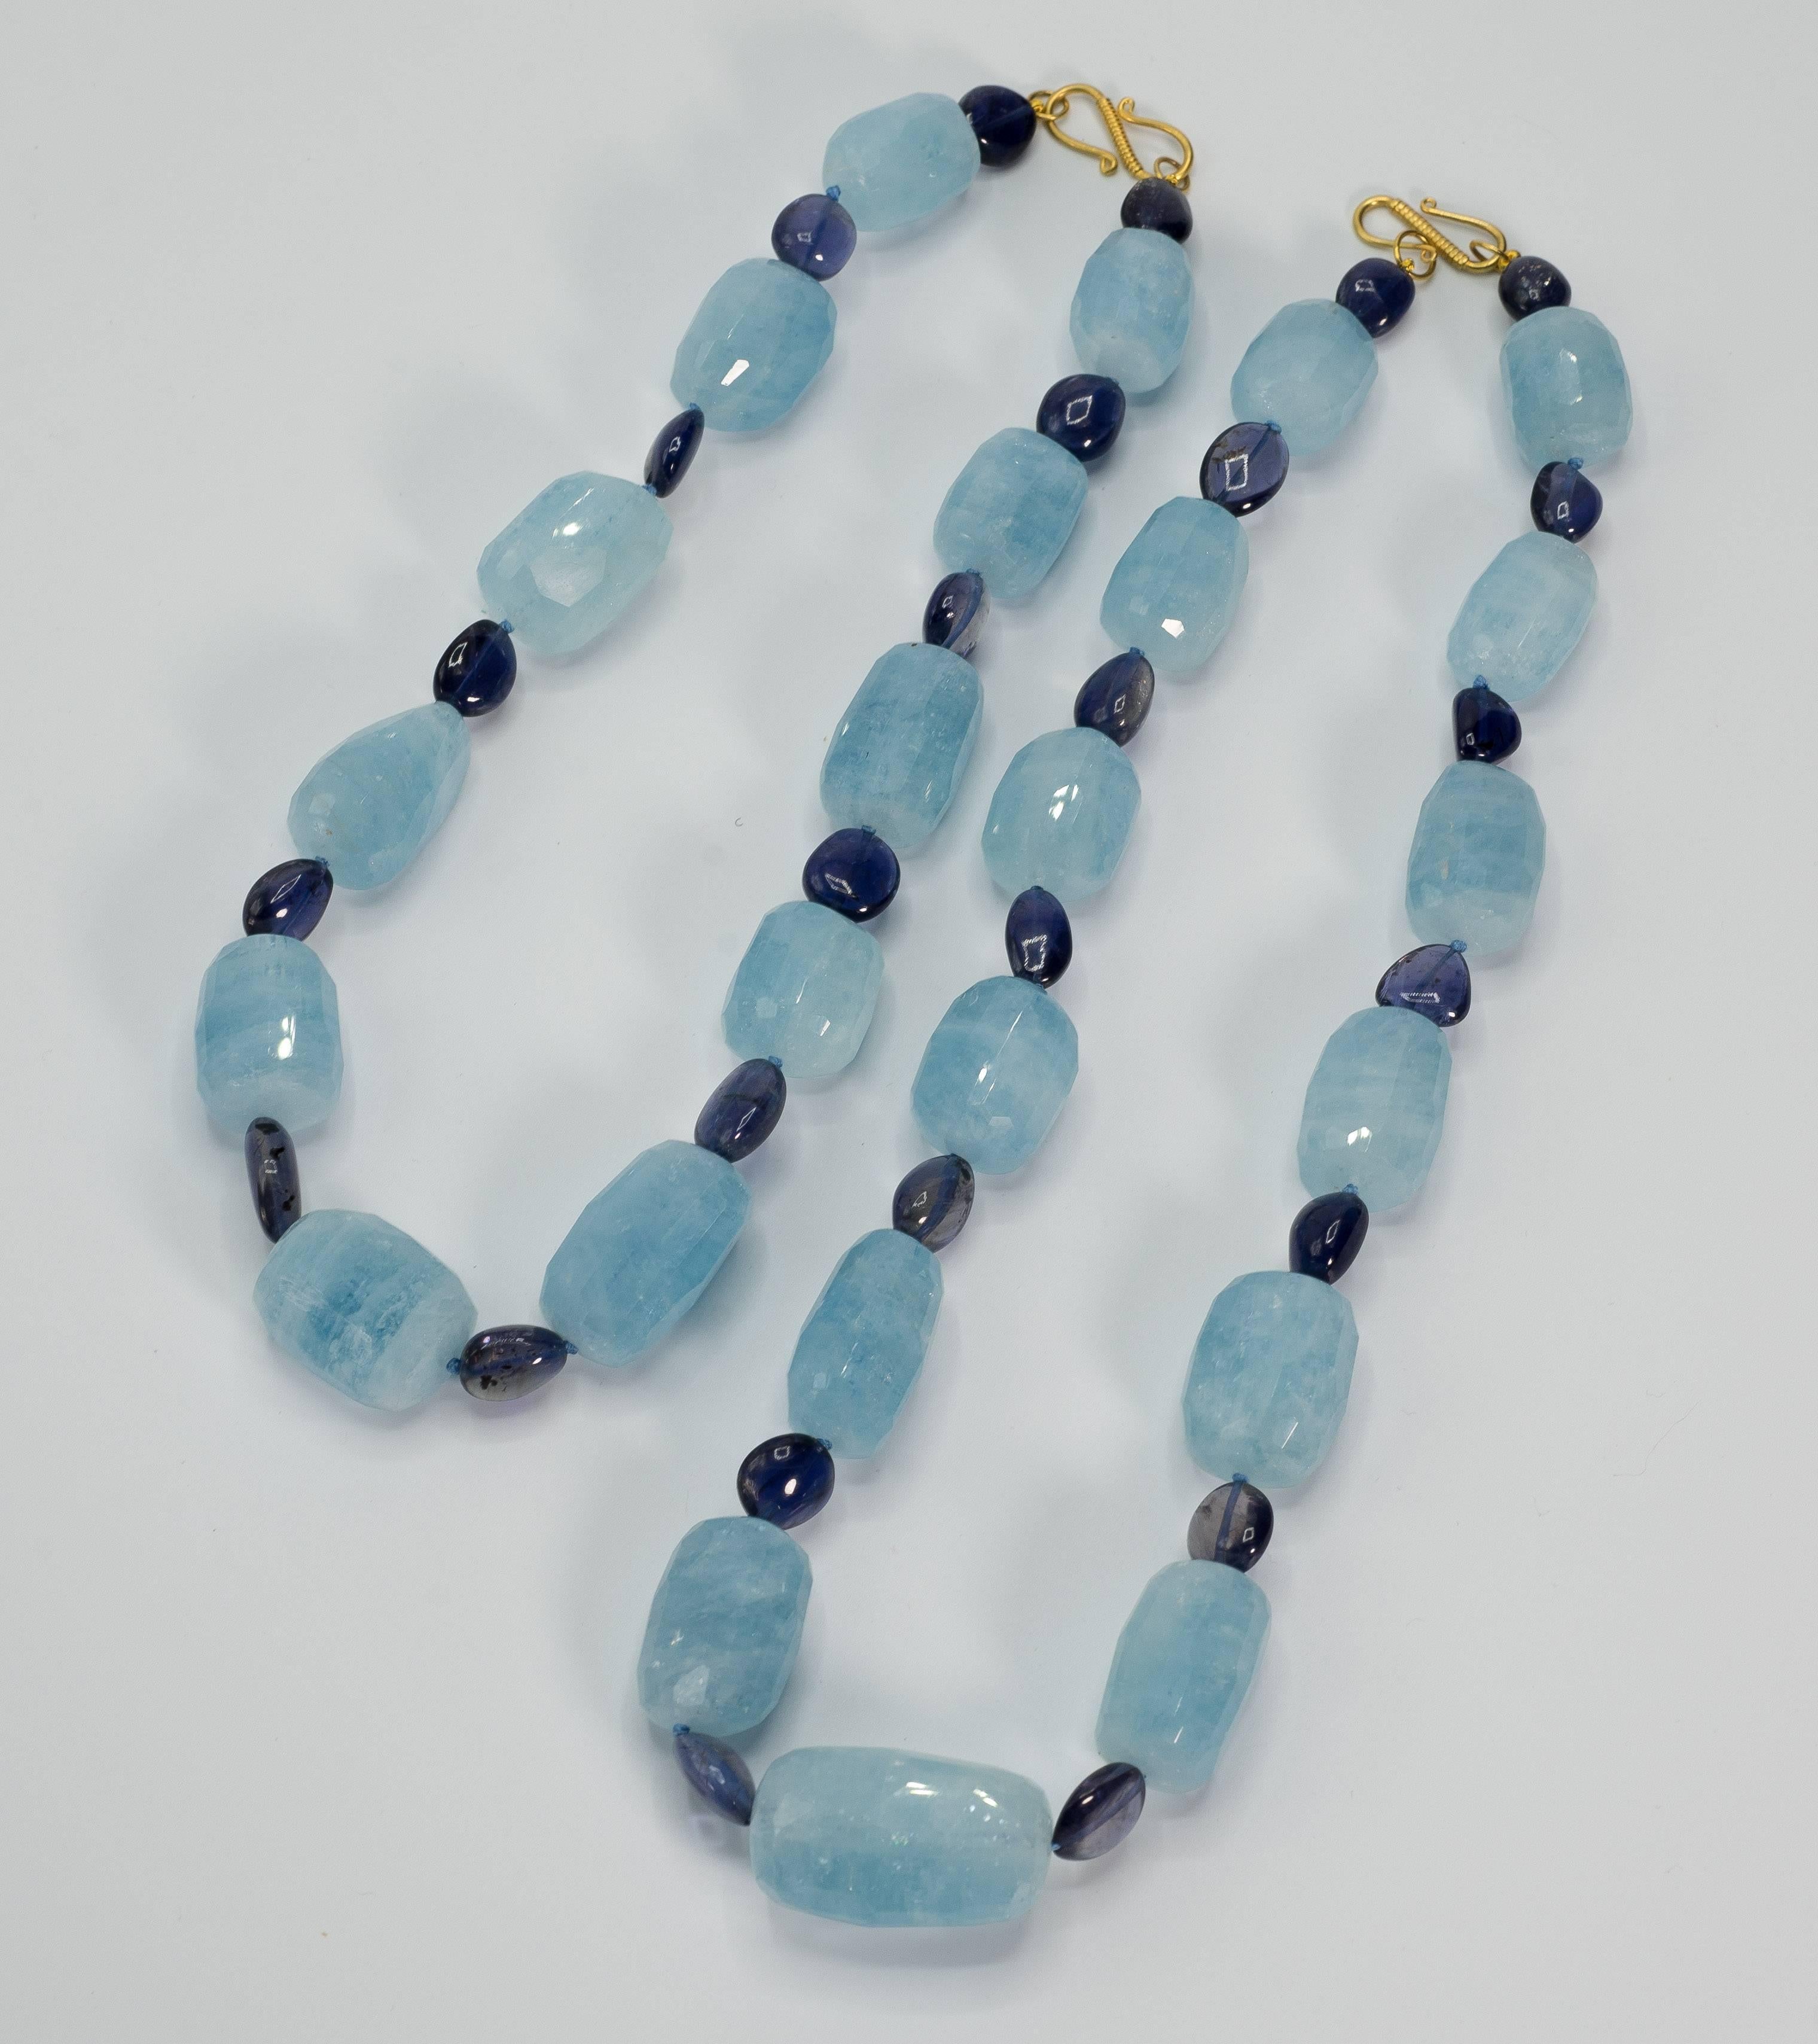 Wonderful, versatile and wearable double separable large Aquamarine and navy blue Kyanite gold clasp necklaces. May be worn as a pair or singly, each necklace nests for double wear, one measures 17'' and the other 20''.  Approximate weight of